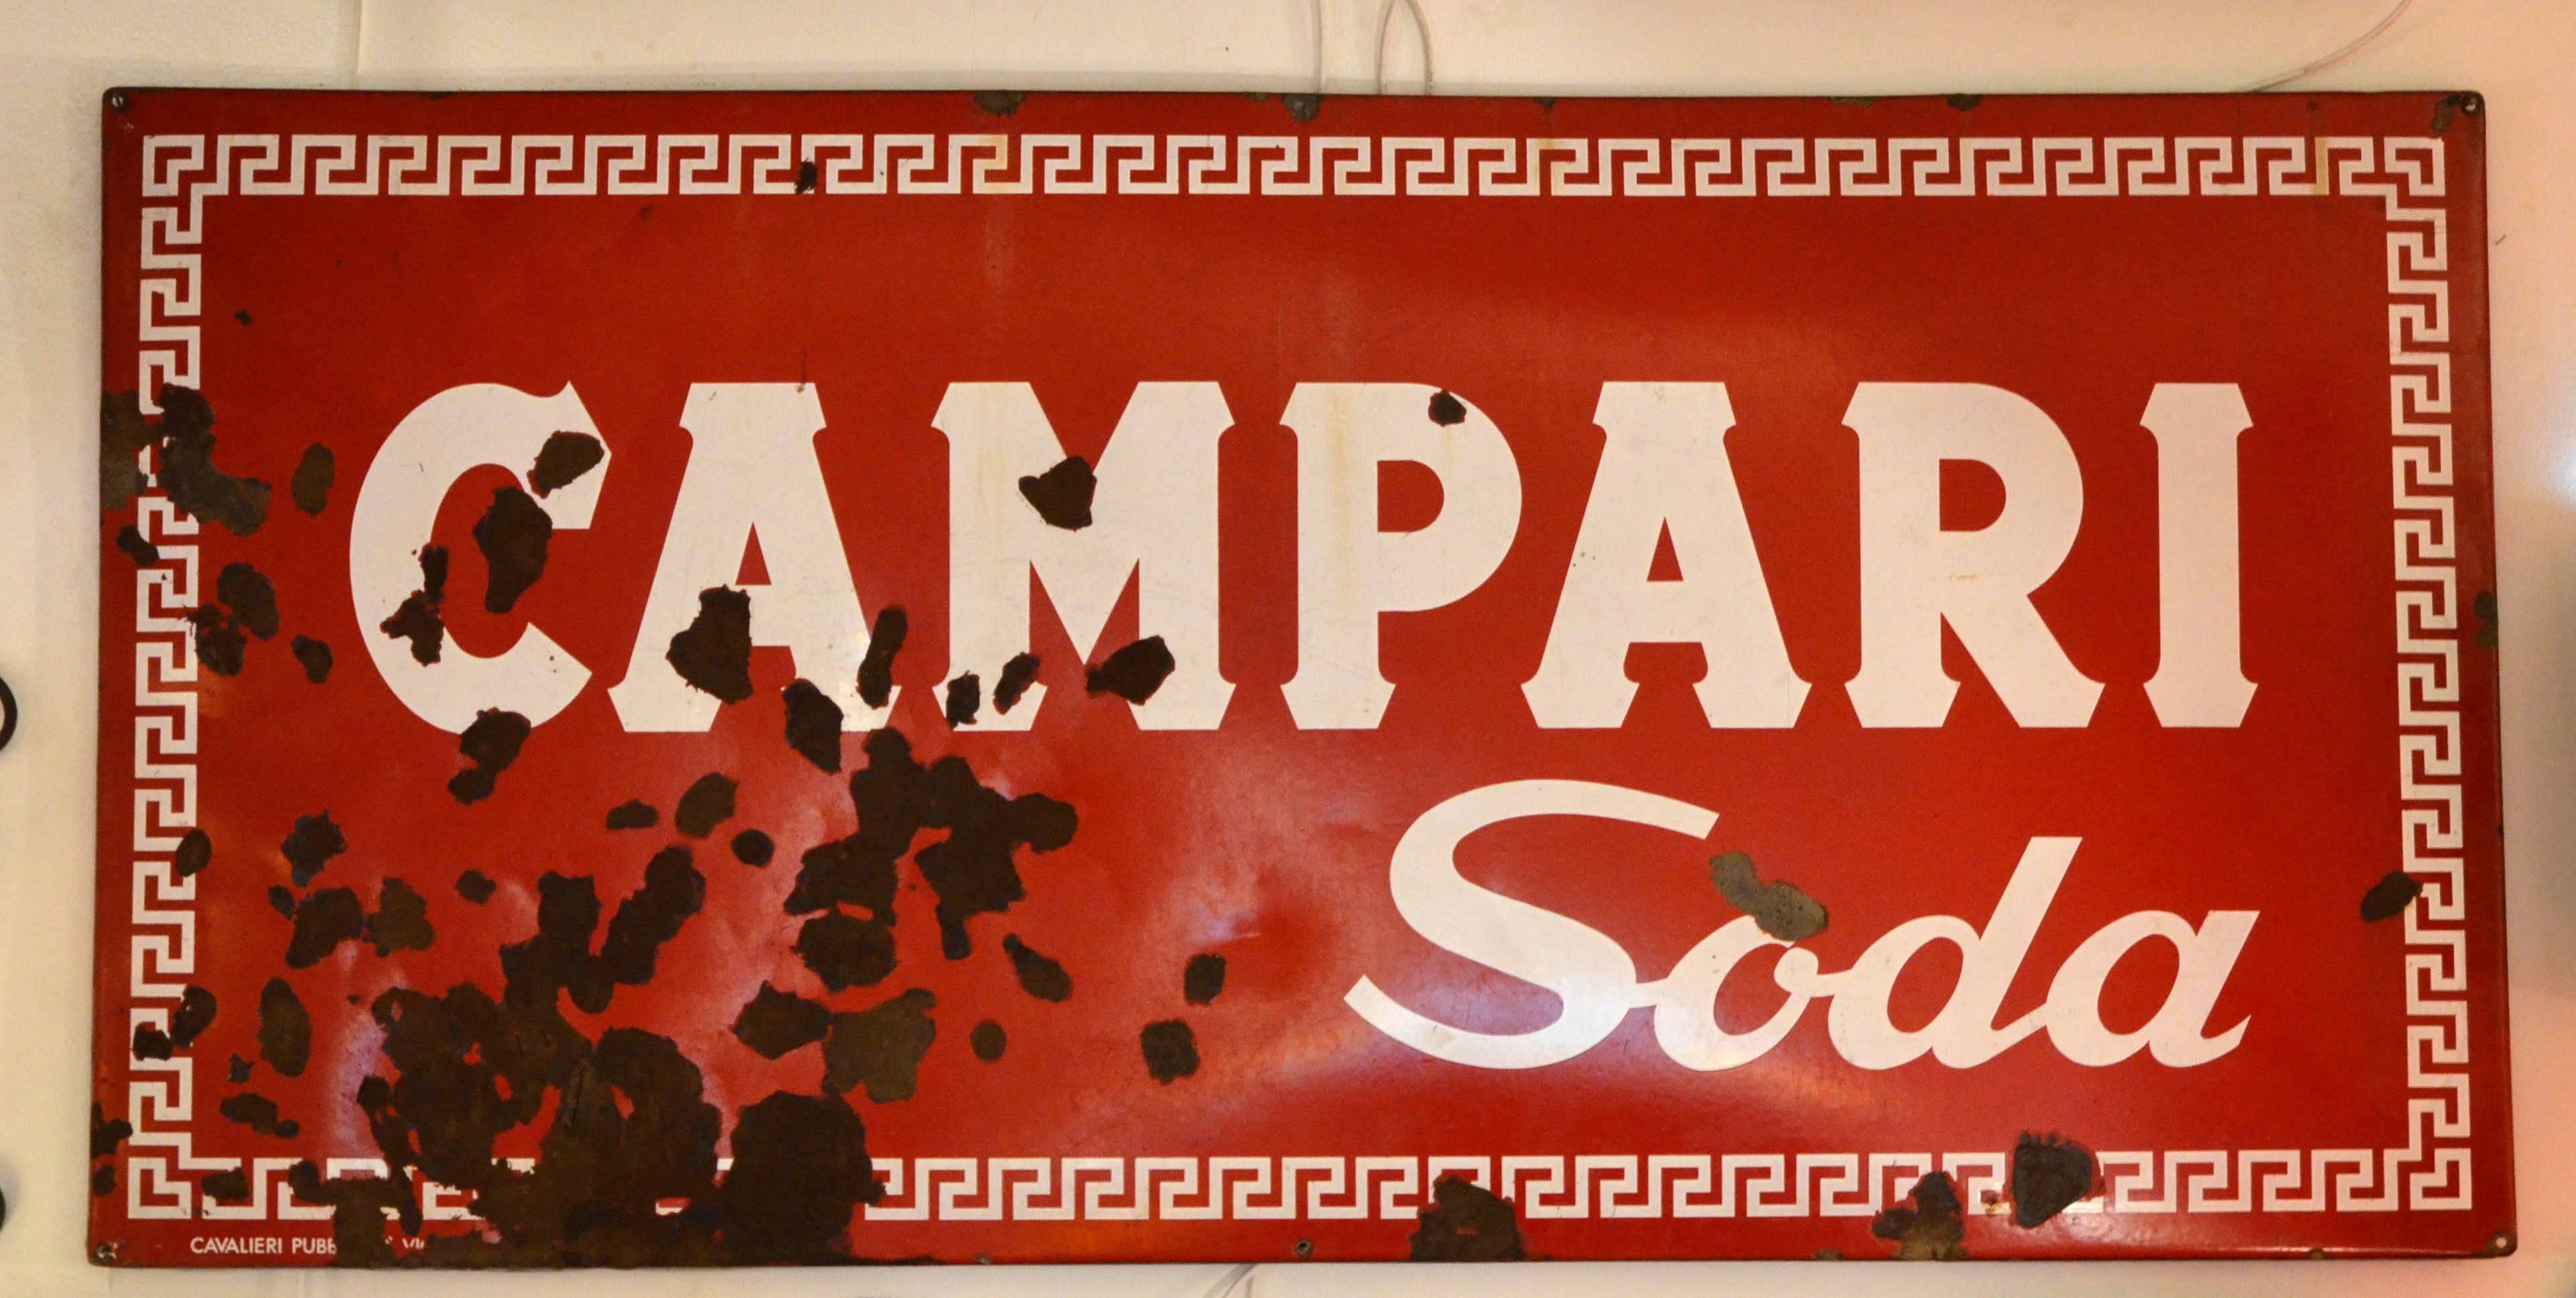 This large enamel metal sign of Campari Soda was produced in the 1960s by
Cavalieri Pubblicità in Vicenza, Italy.
Cavalieri Pubblicità produced three different type of large enamel metal sign for Campari: Bitter Campari, Campari Soda or a plane